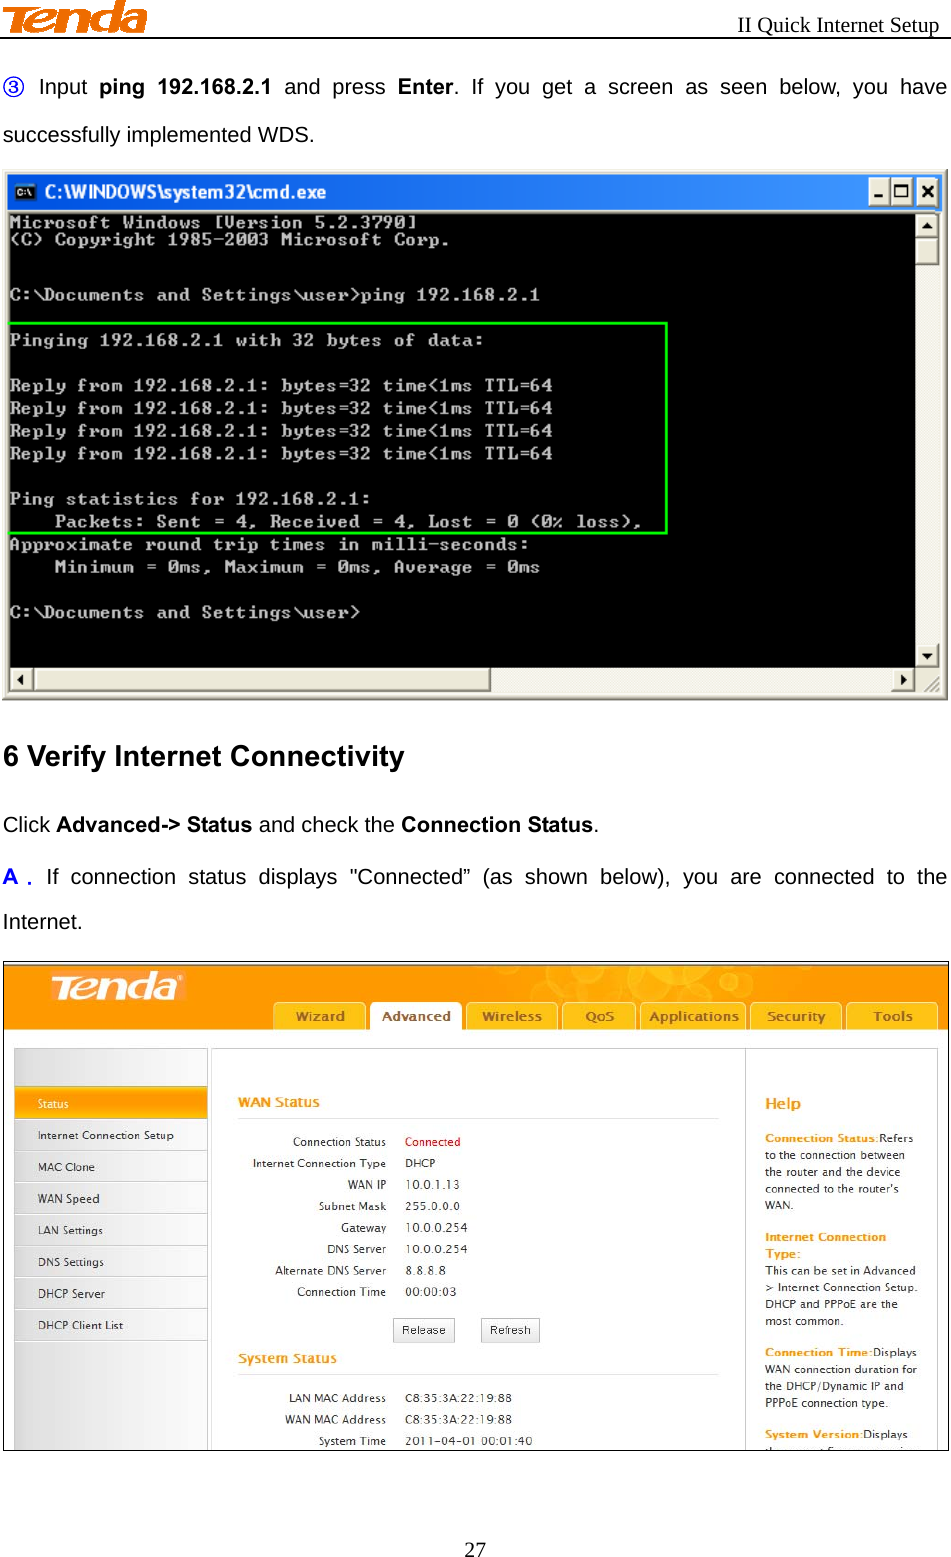                                                       II Quick Internet Setup 27 ③  Input ping 192.168.2.1 and press Enter. If you get a screen as seen below, you have successfully implemented WDS.  6 Verify Internet Connectivity Click Advanced-&gt; Status and check the Connection Status. A． If connection status displays &quot;Connected” (as shown below), you are connected to the Internet.  